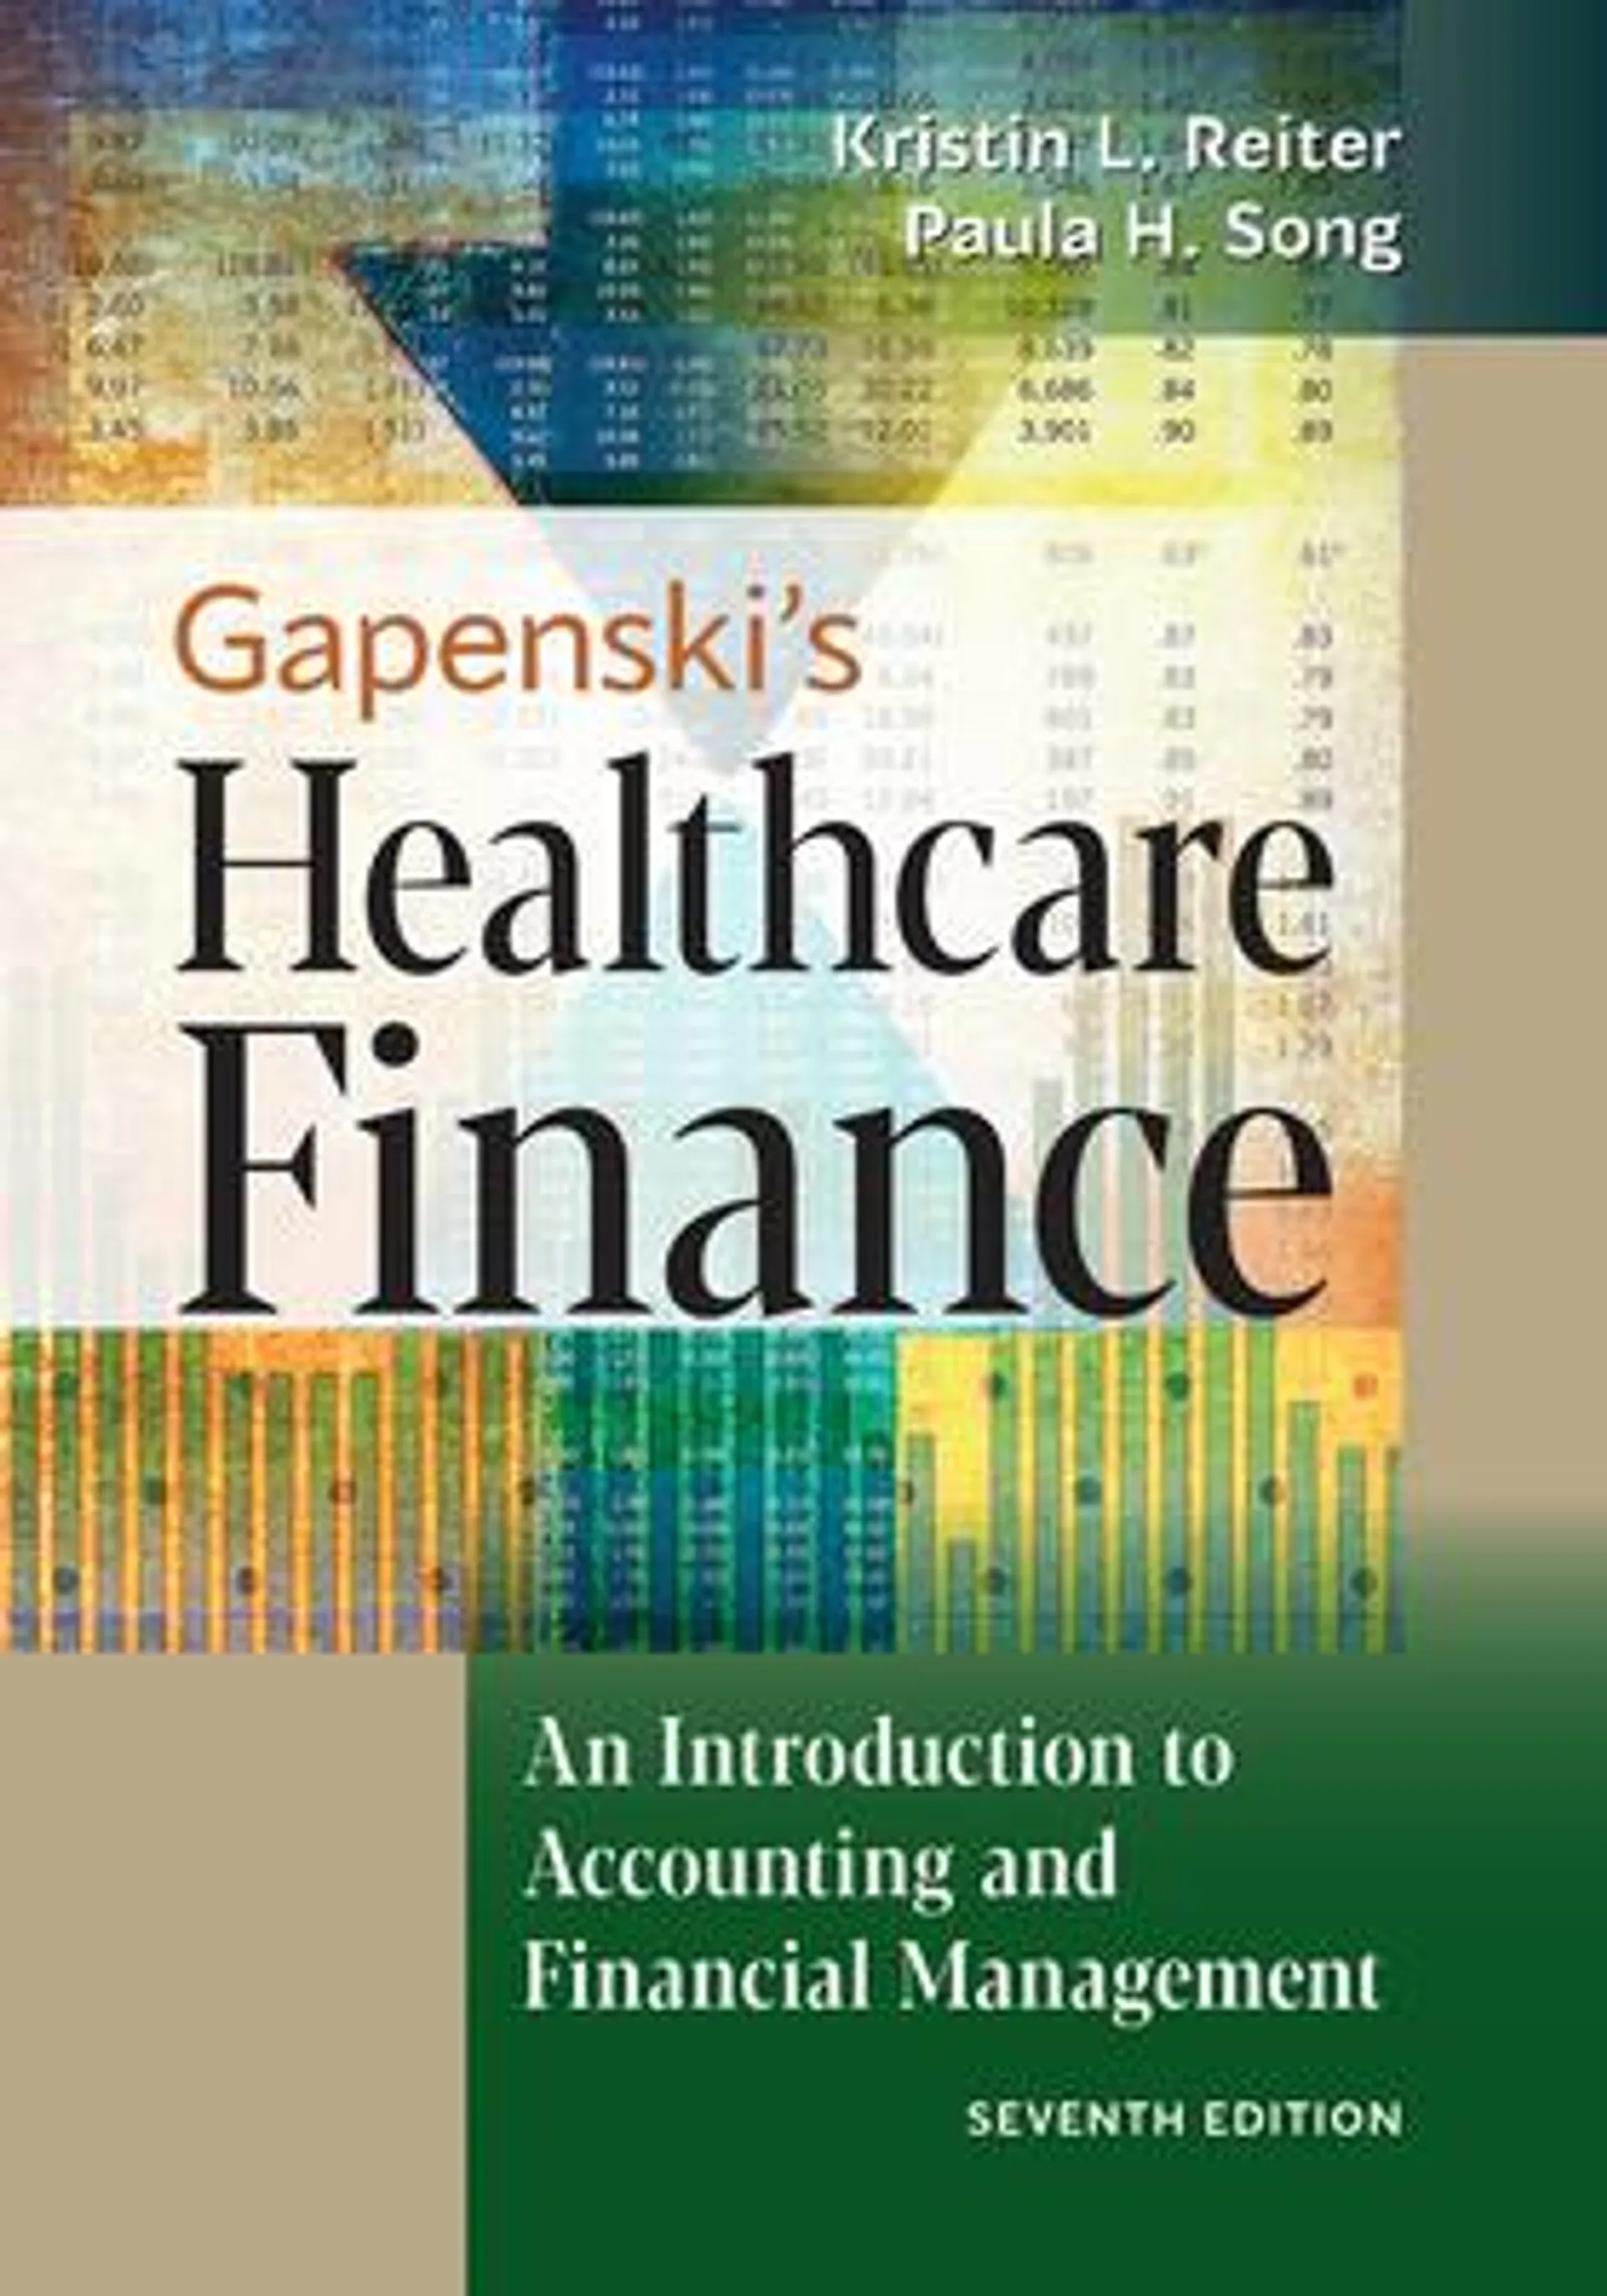 Gapenski's Healthcare Finance: An Introduction to Accounting and Financial Management, Seventh Edition (7th edition)